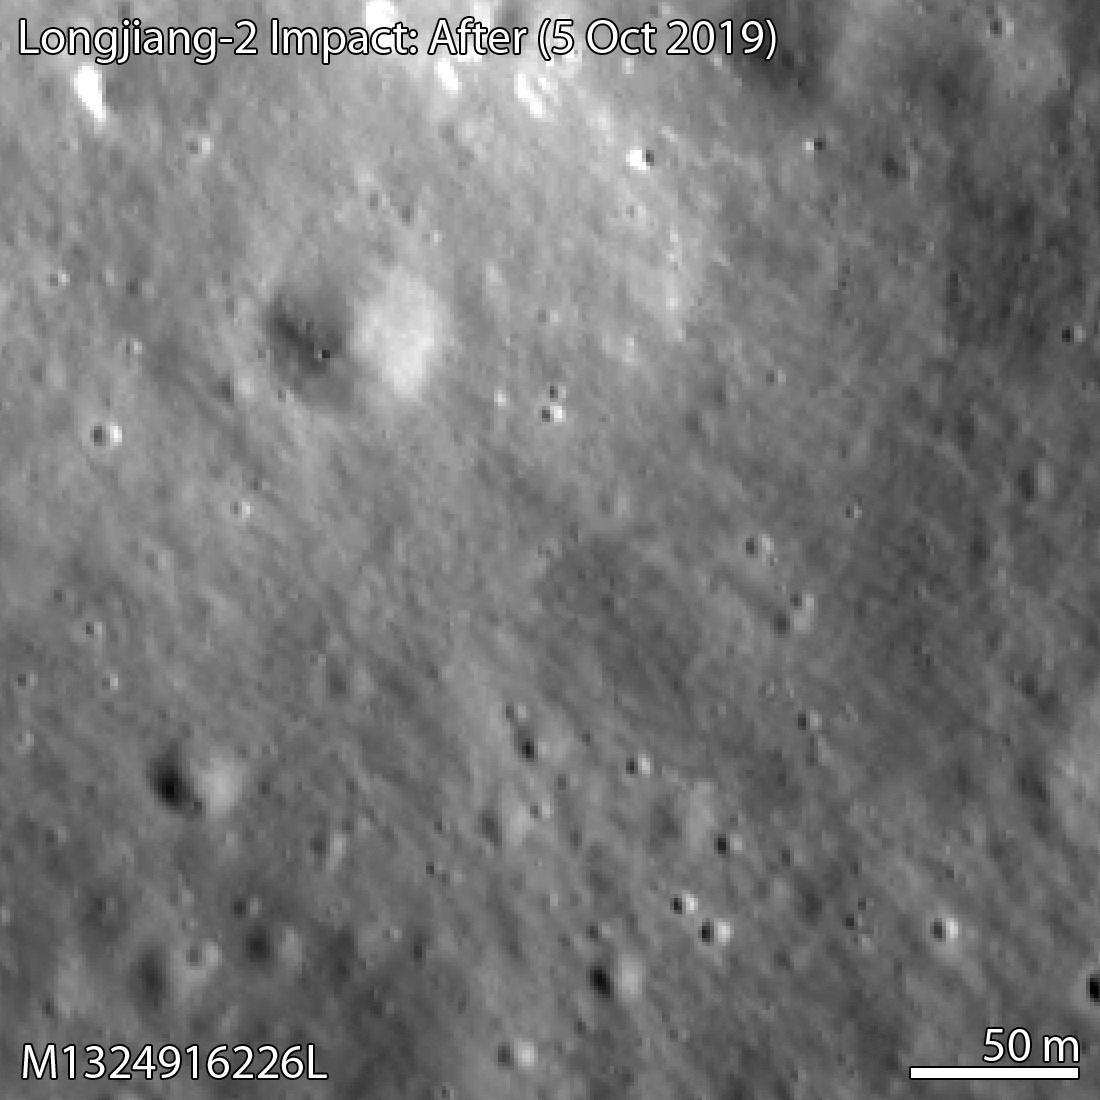 China's Microsatellite Crash Site on the Moon Spotted by NASA Lunar Orbiter